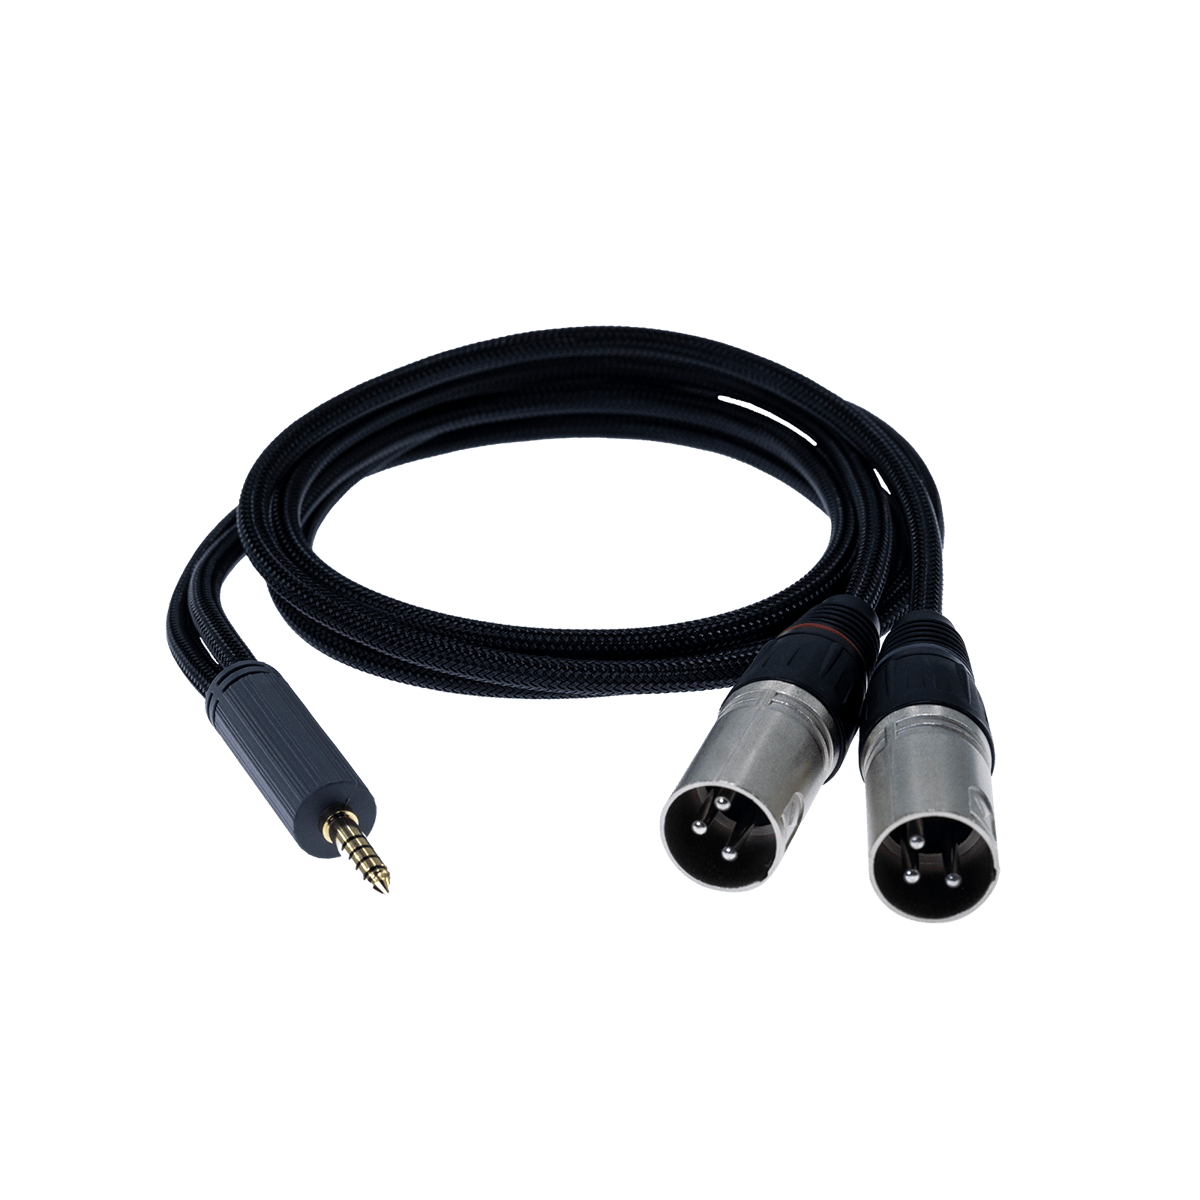 iFi audio 4.4 to XLR cable SE / 4.4mm - 3pin XL